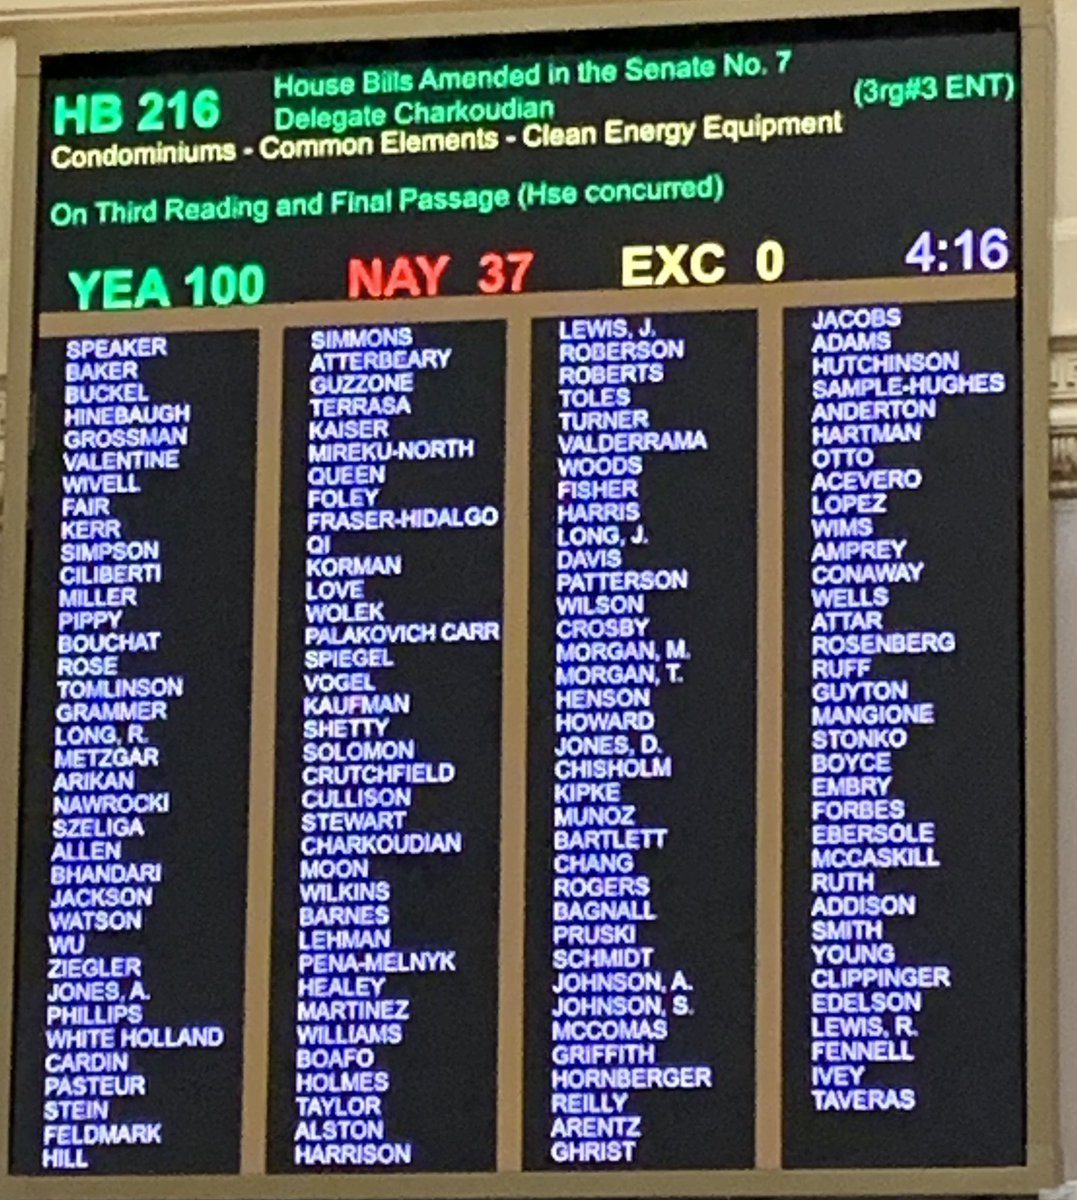 HB 216 - streamlining the process for condominiums to get solar and clean energy equipment is on its way to the Governor’s desk! #MDGA24 #MDDemsAtWork #ClimateAction #SolarForAll